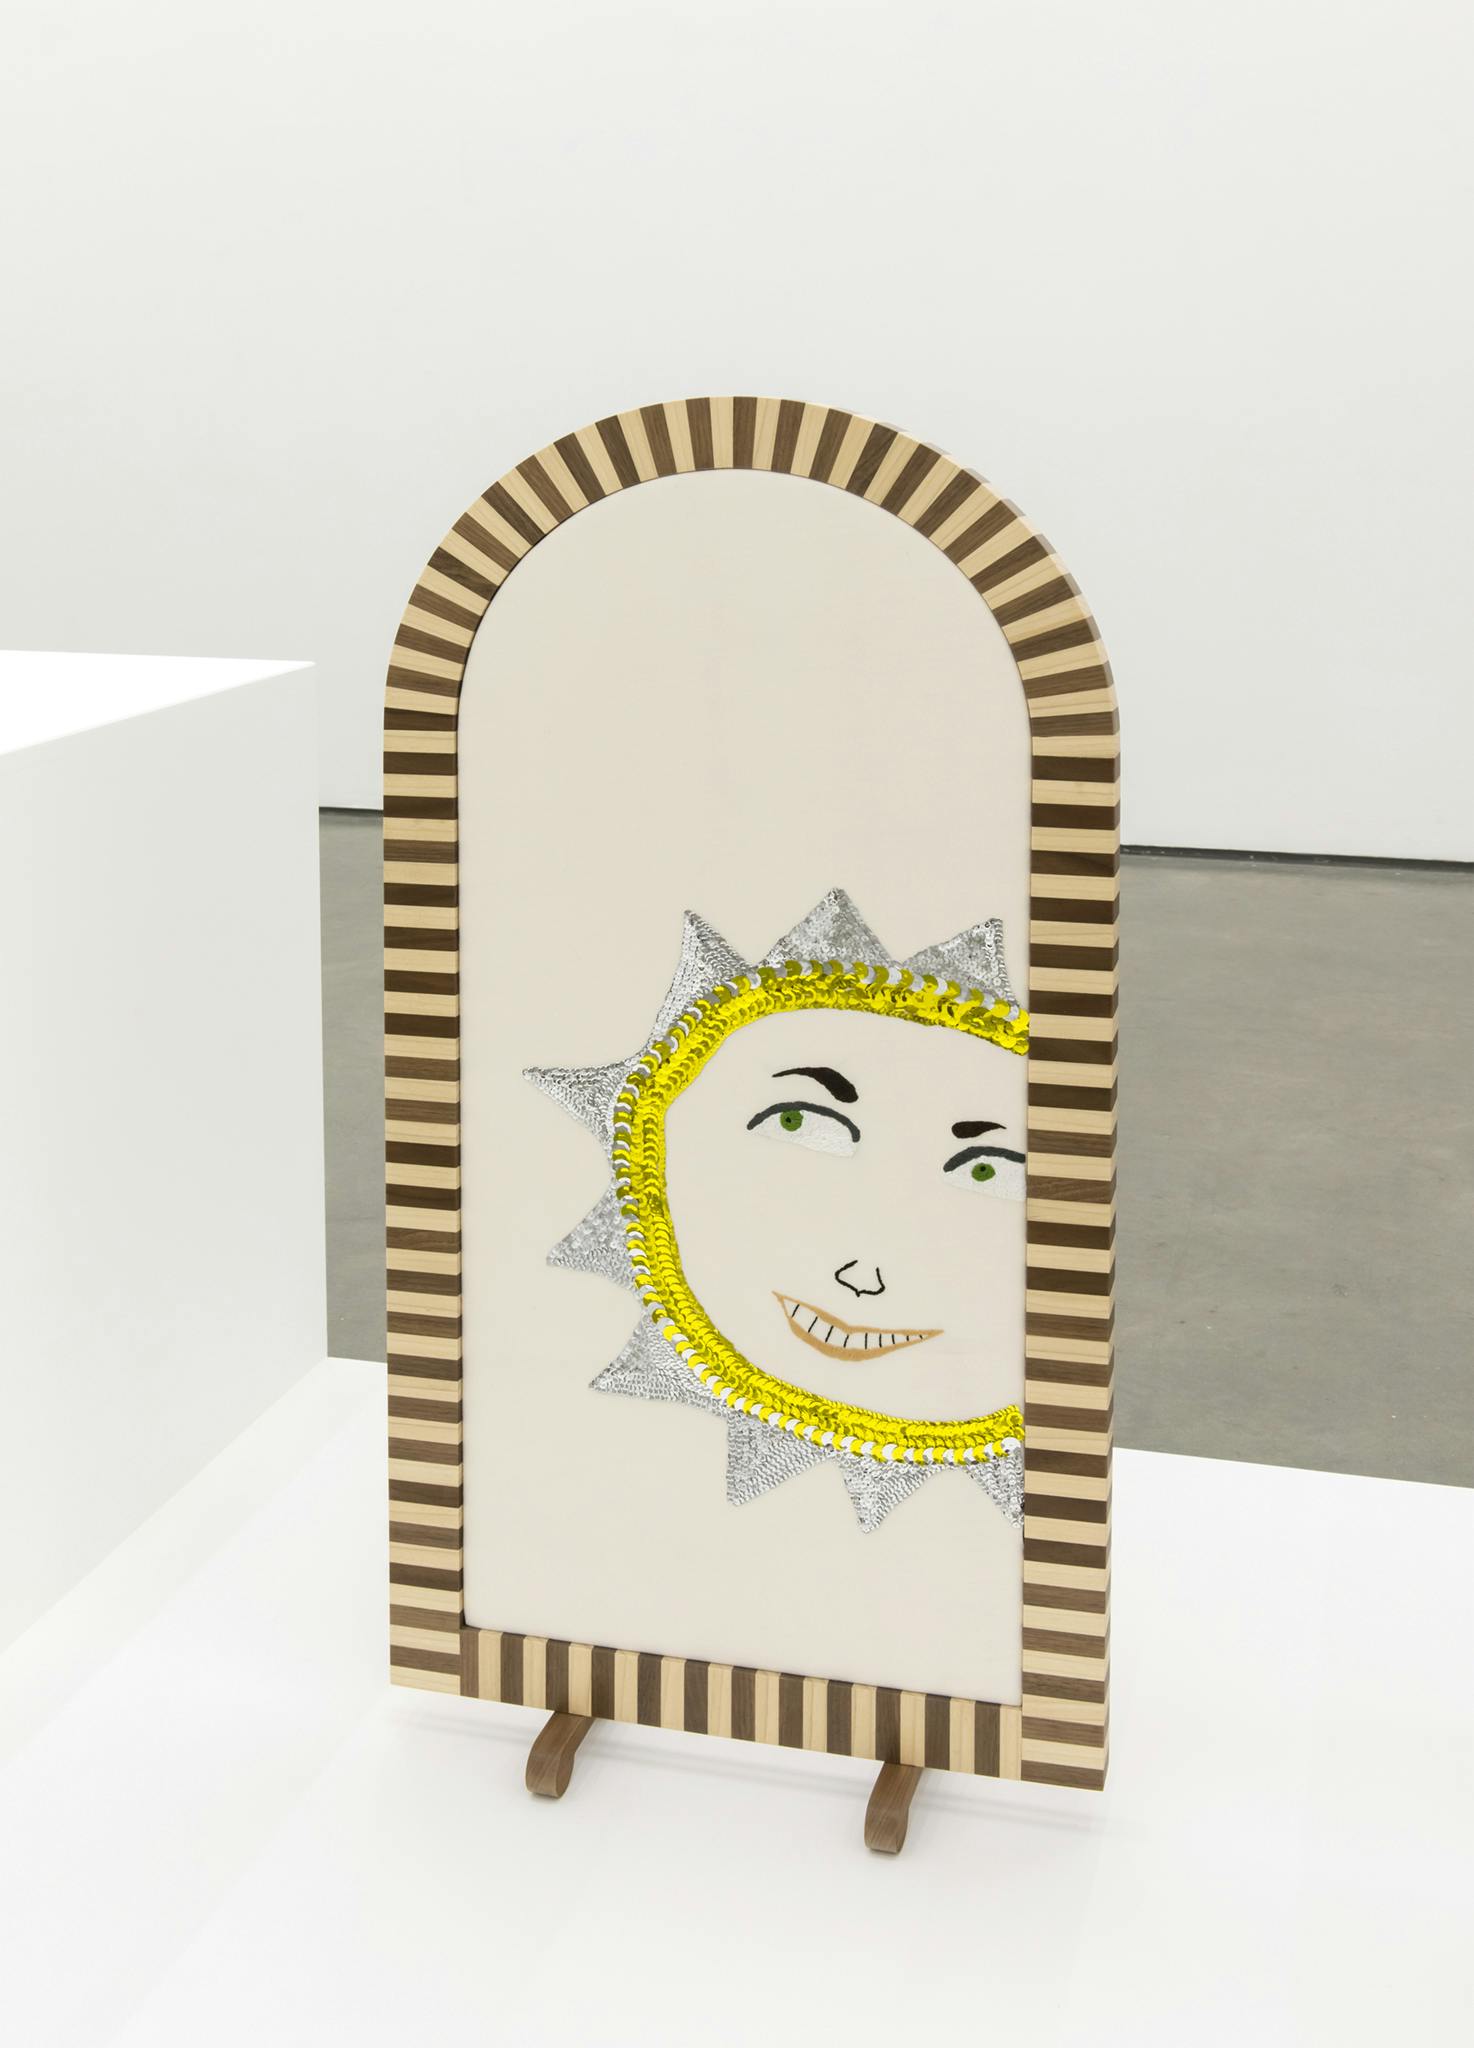 A fire screen with a brown and beige striped wooden frame sits on top of a plinth. Within the screen, a thread and sequined embroidery sun with a grinning face sits off center. 